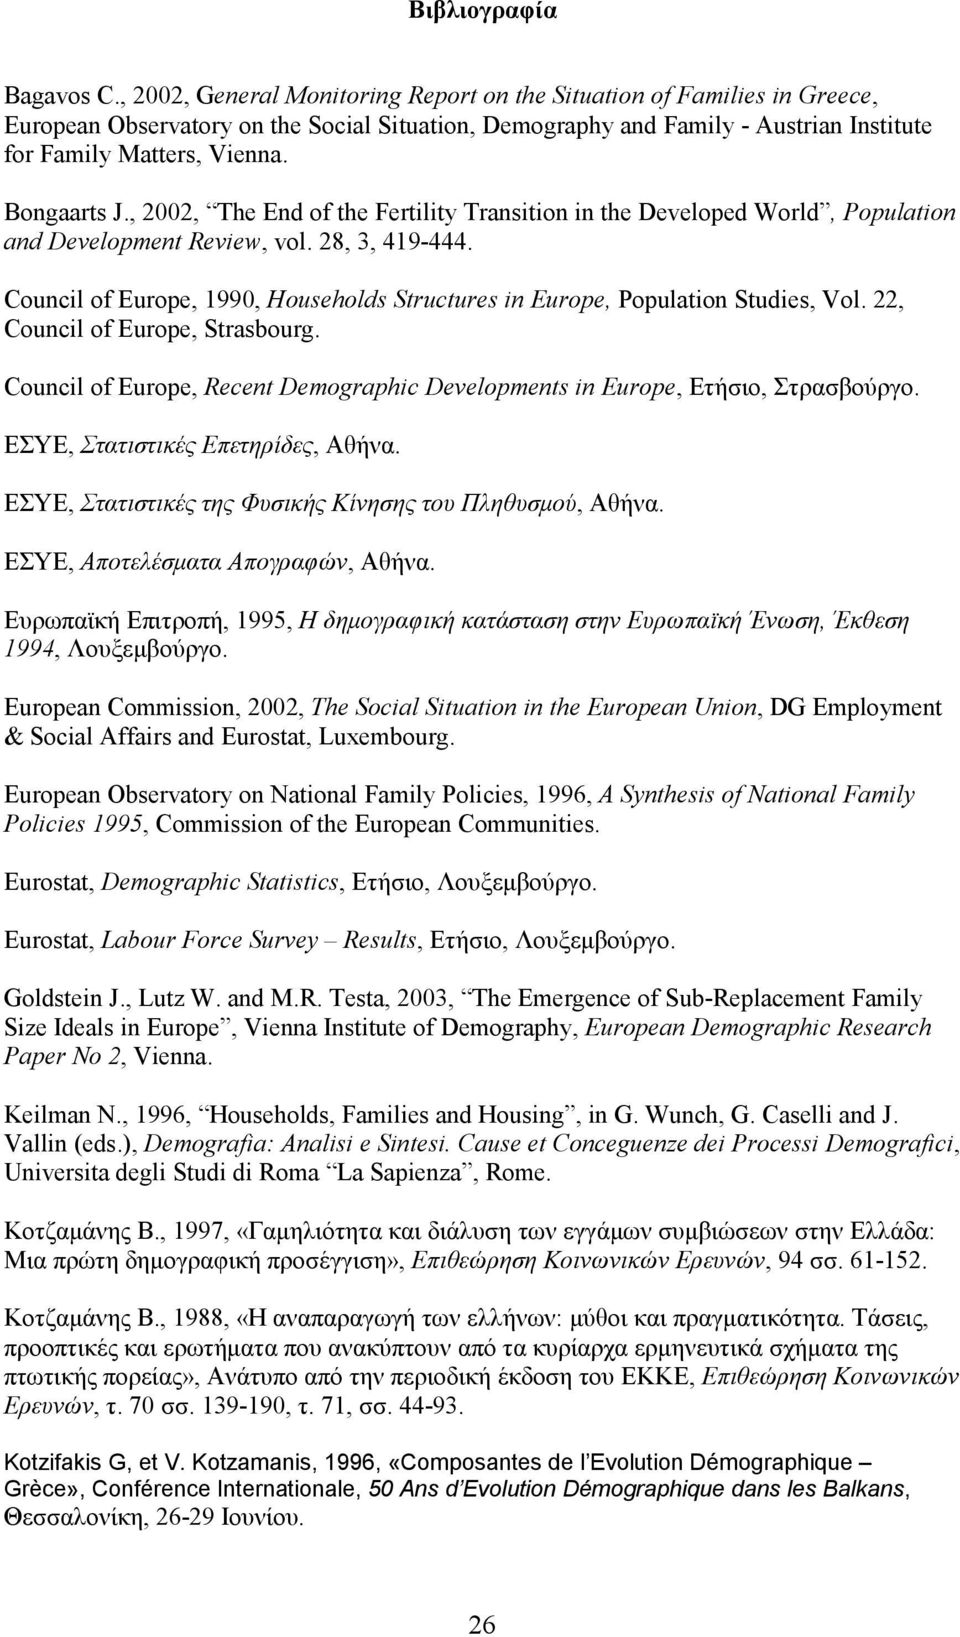 Bongaarts J., 2002, The End of the Fertility Transition in the Developed World, Population and Development Review, vol. 28, 3, 419-444.